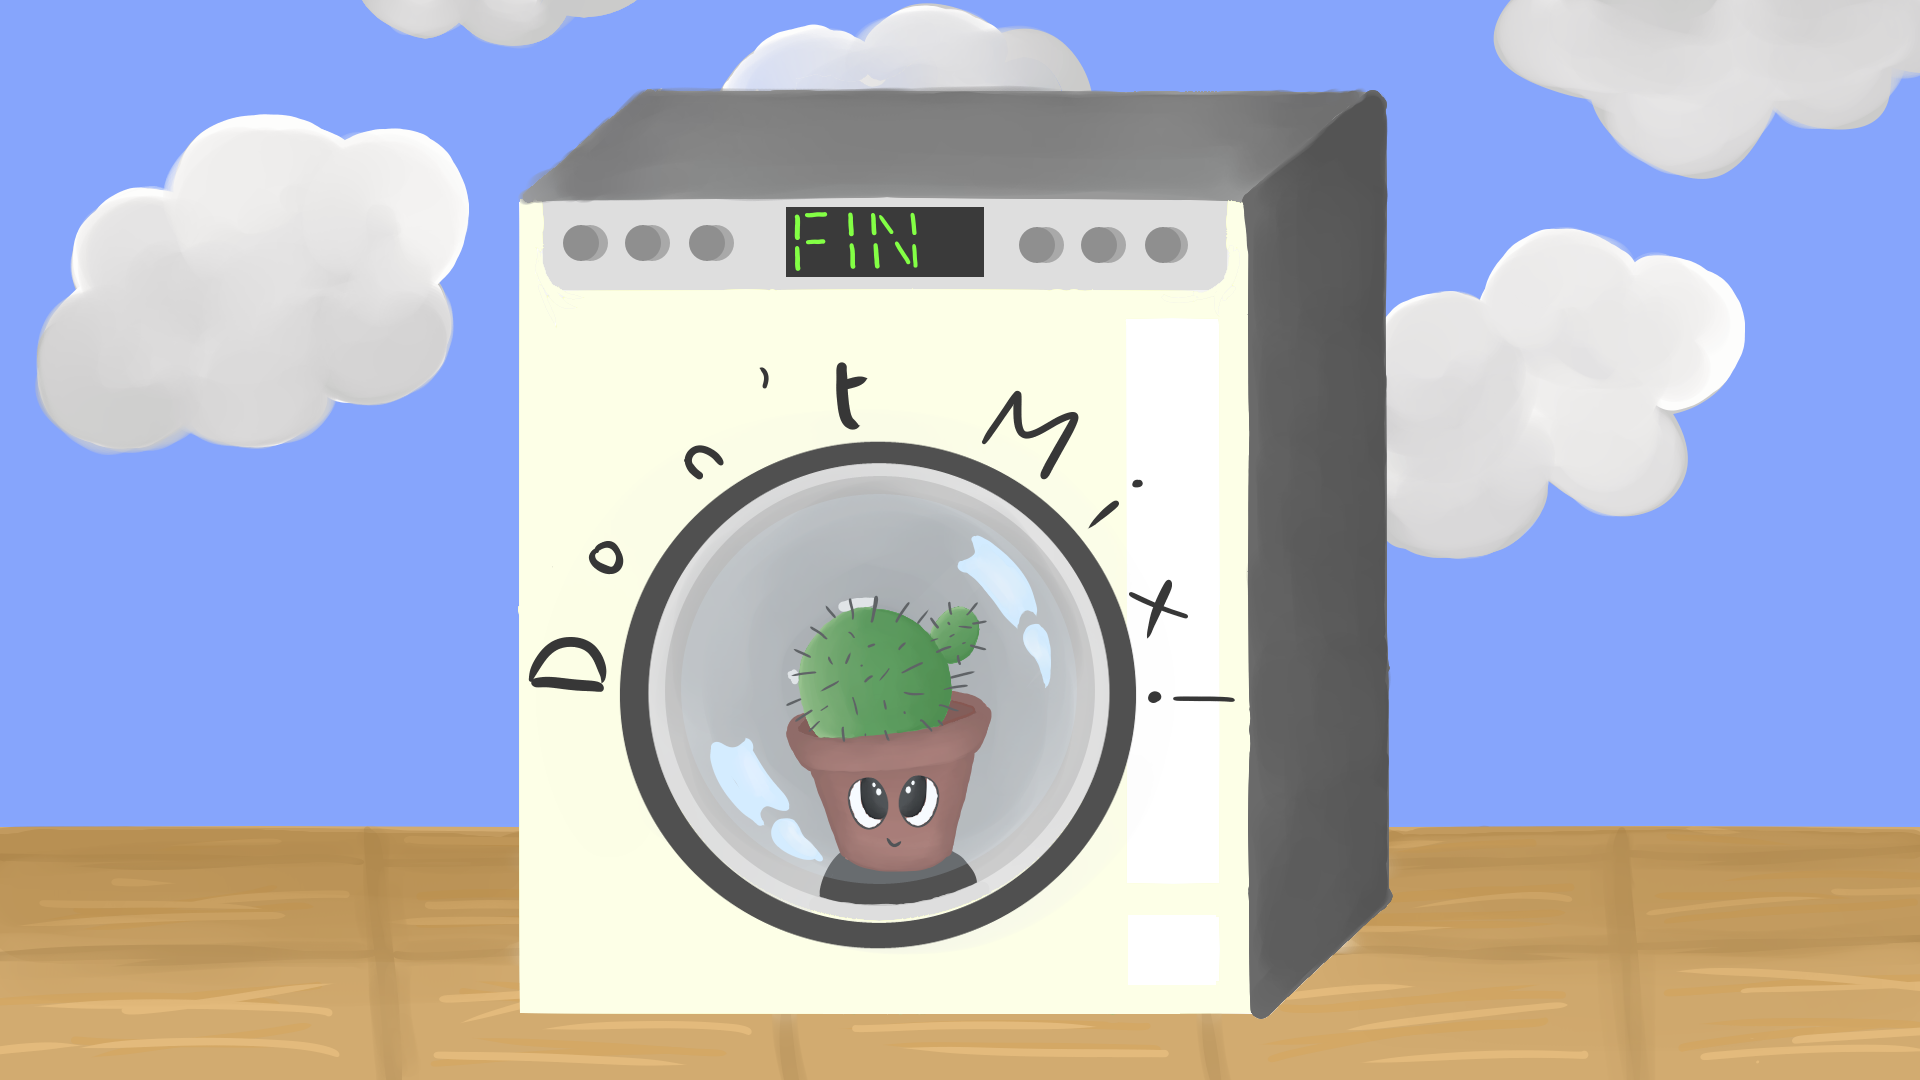 Don't Mix! On Laundry Day